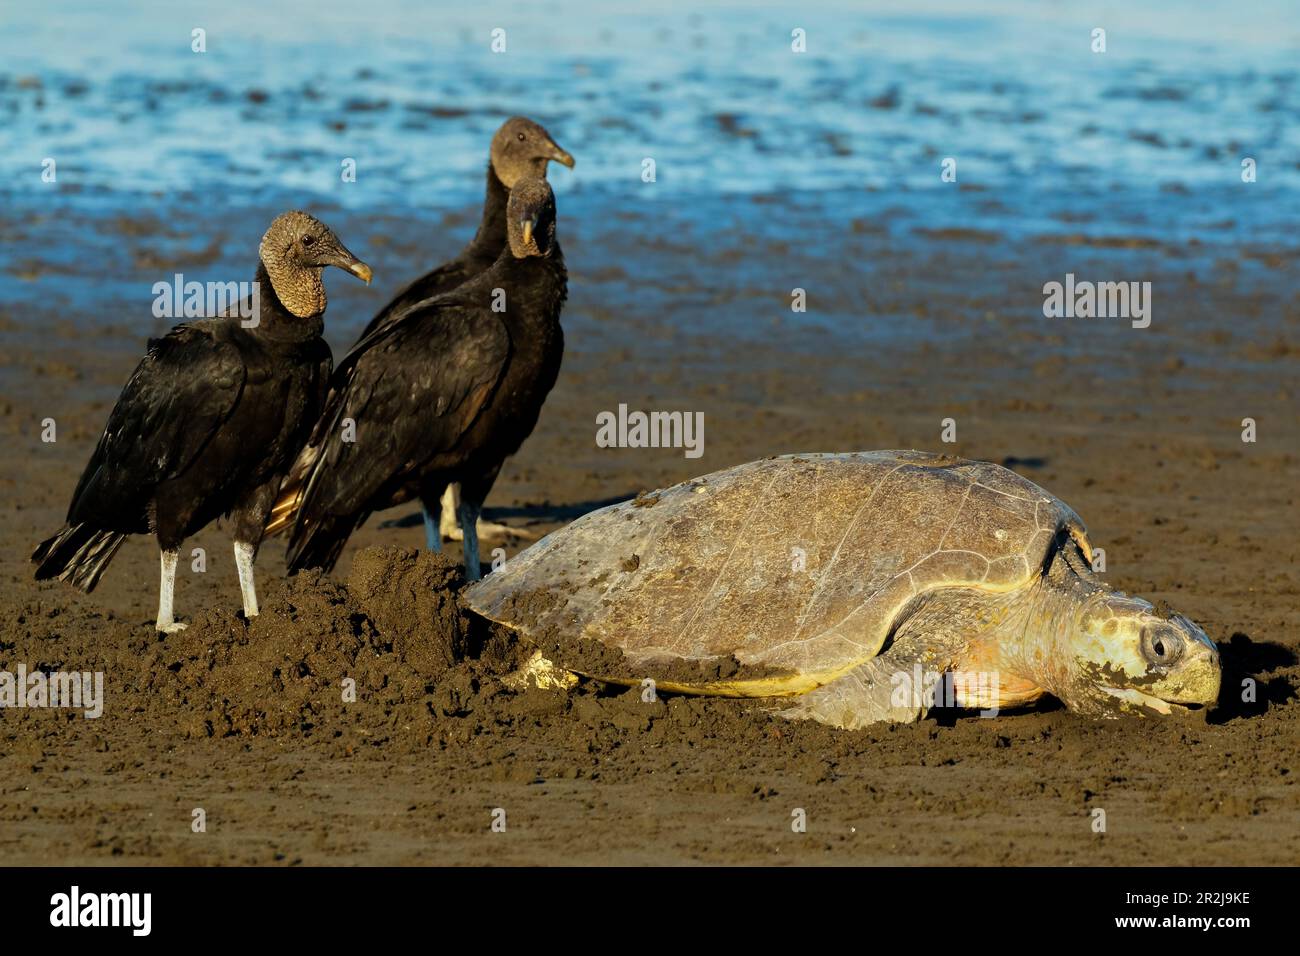 Vultures wait to steal eggs as Olive Ridley turtle digs nest at this refuge, Ostional, Nicoya Peninsula, Guanacaste, Costa Rica, Central America Stock Photo